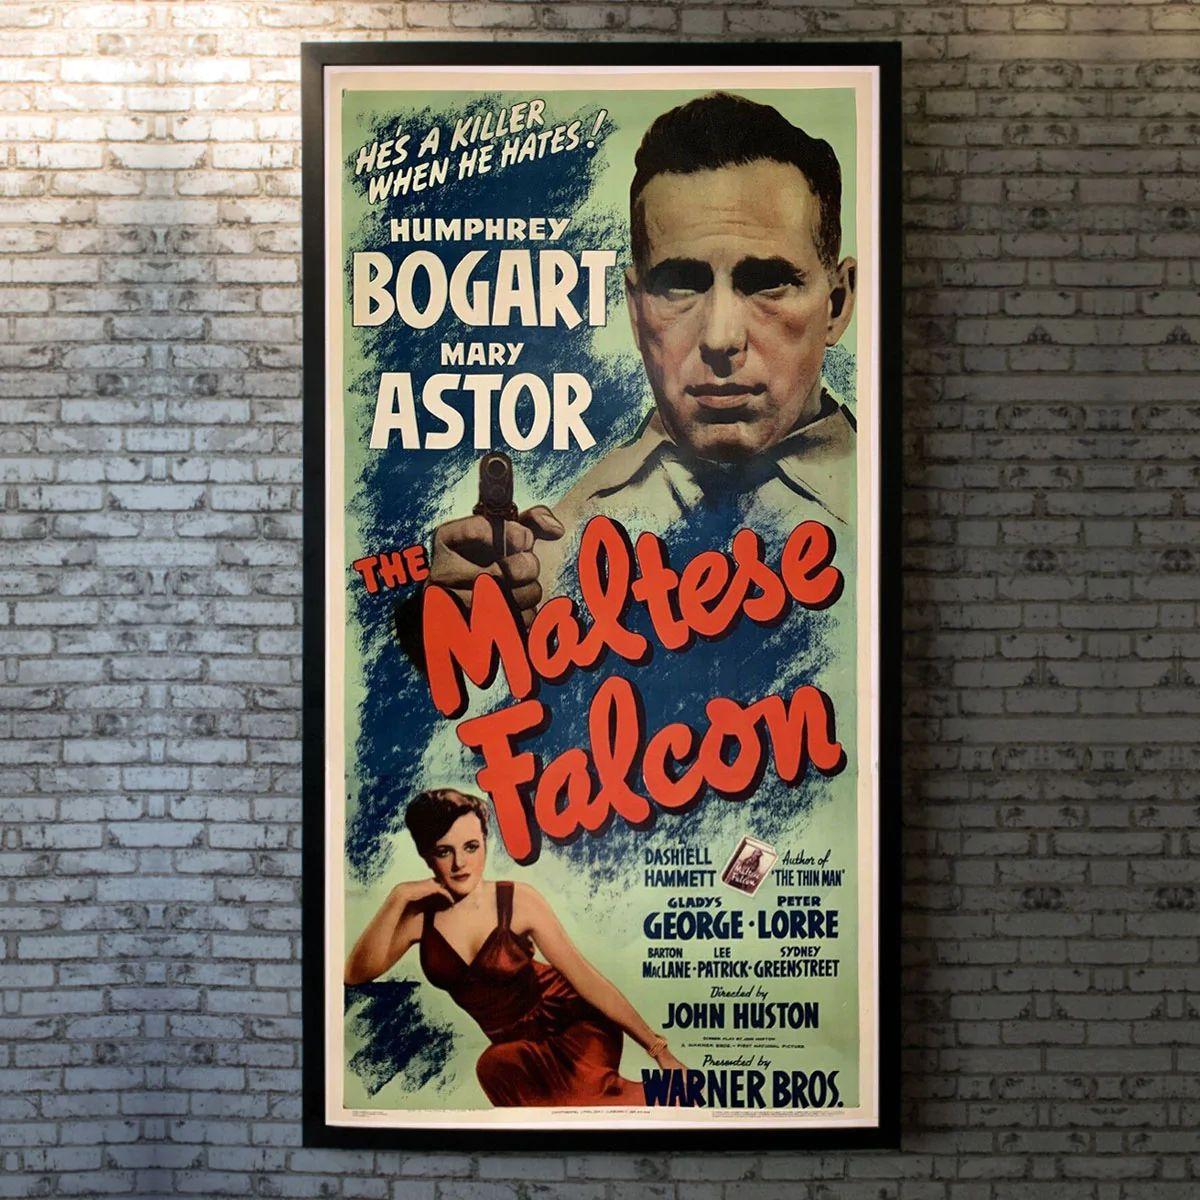 The Maltese Falcon, unframed poster, 1941

Three sheet (41 X 81 Inches). San Francisco private detective Sam Spade takes on a case that involves him with three eccentric criminals, a gorgeous liar, and their quest for a priceless statuette, with